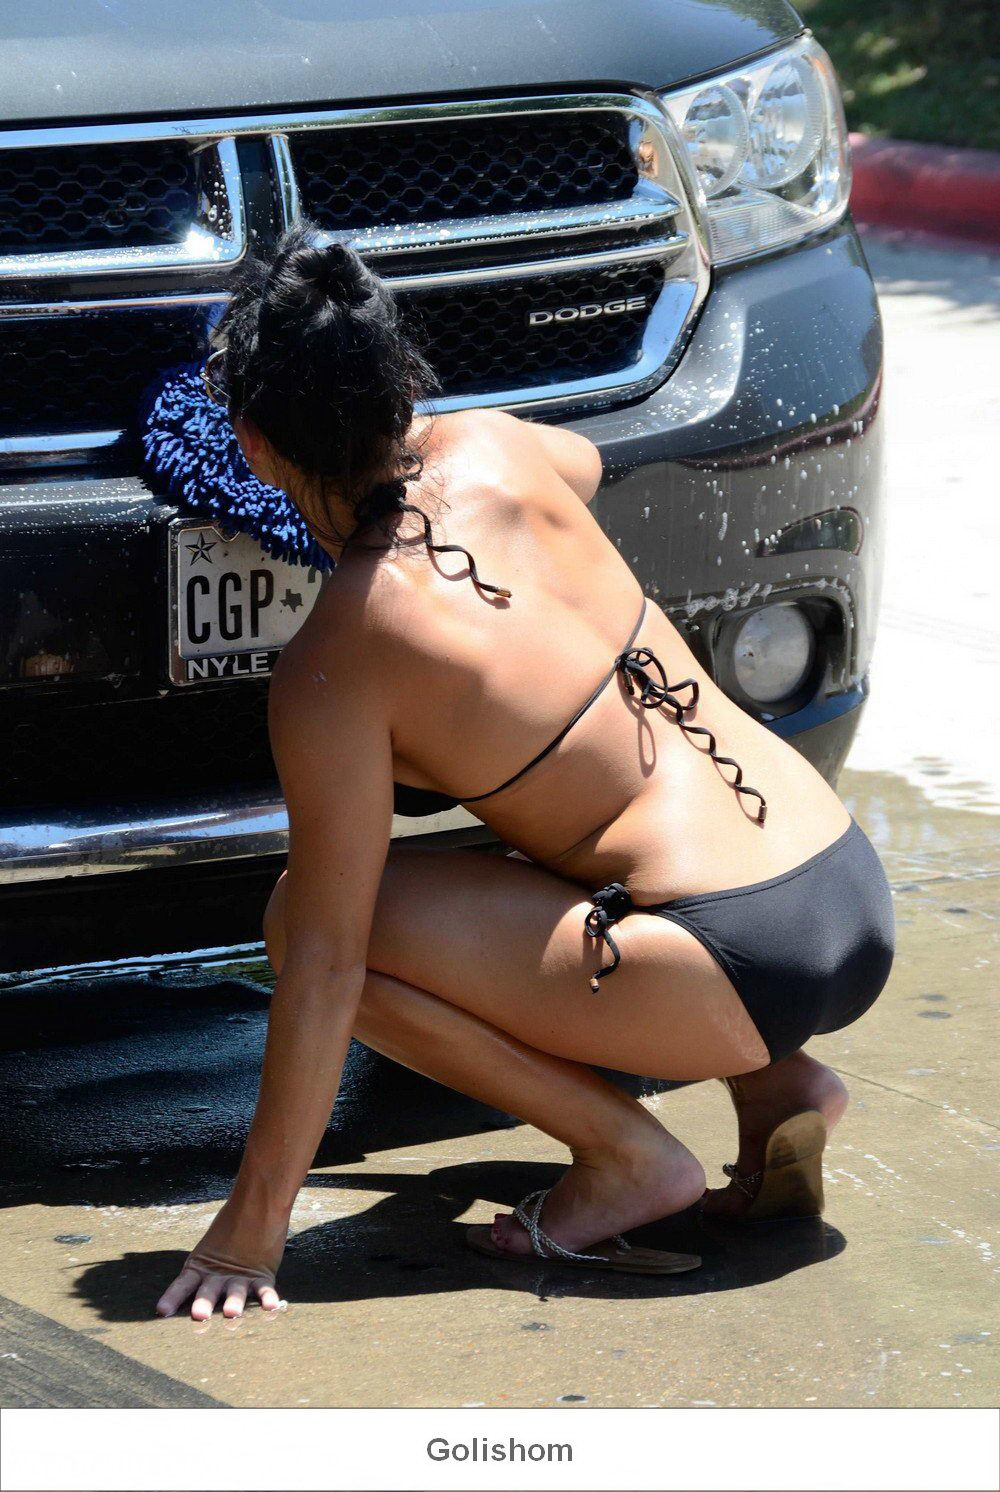 In the USA, car washes with girls in bikinis are very popular